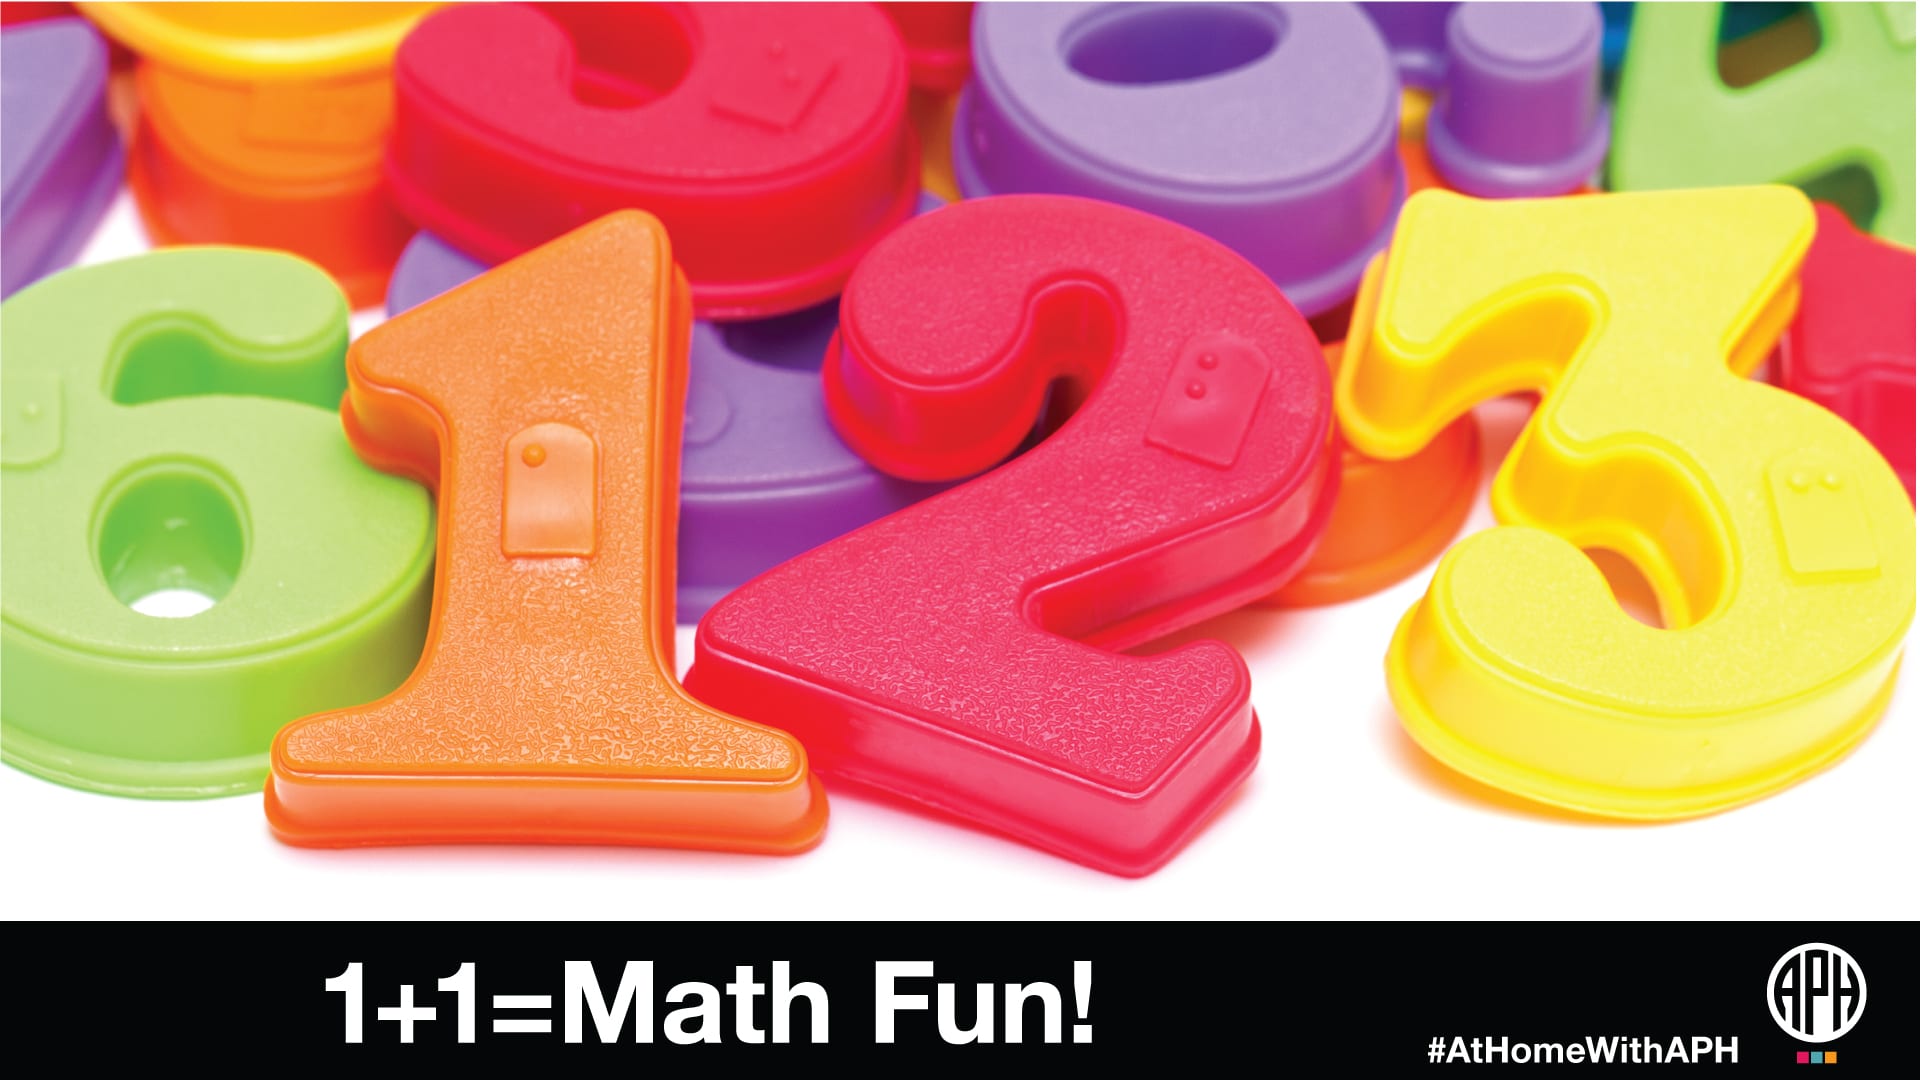 plastic numbers with braille on them, text reads "1+1= Math Fun! #AtHomeWithAPH" and the APH logo